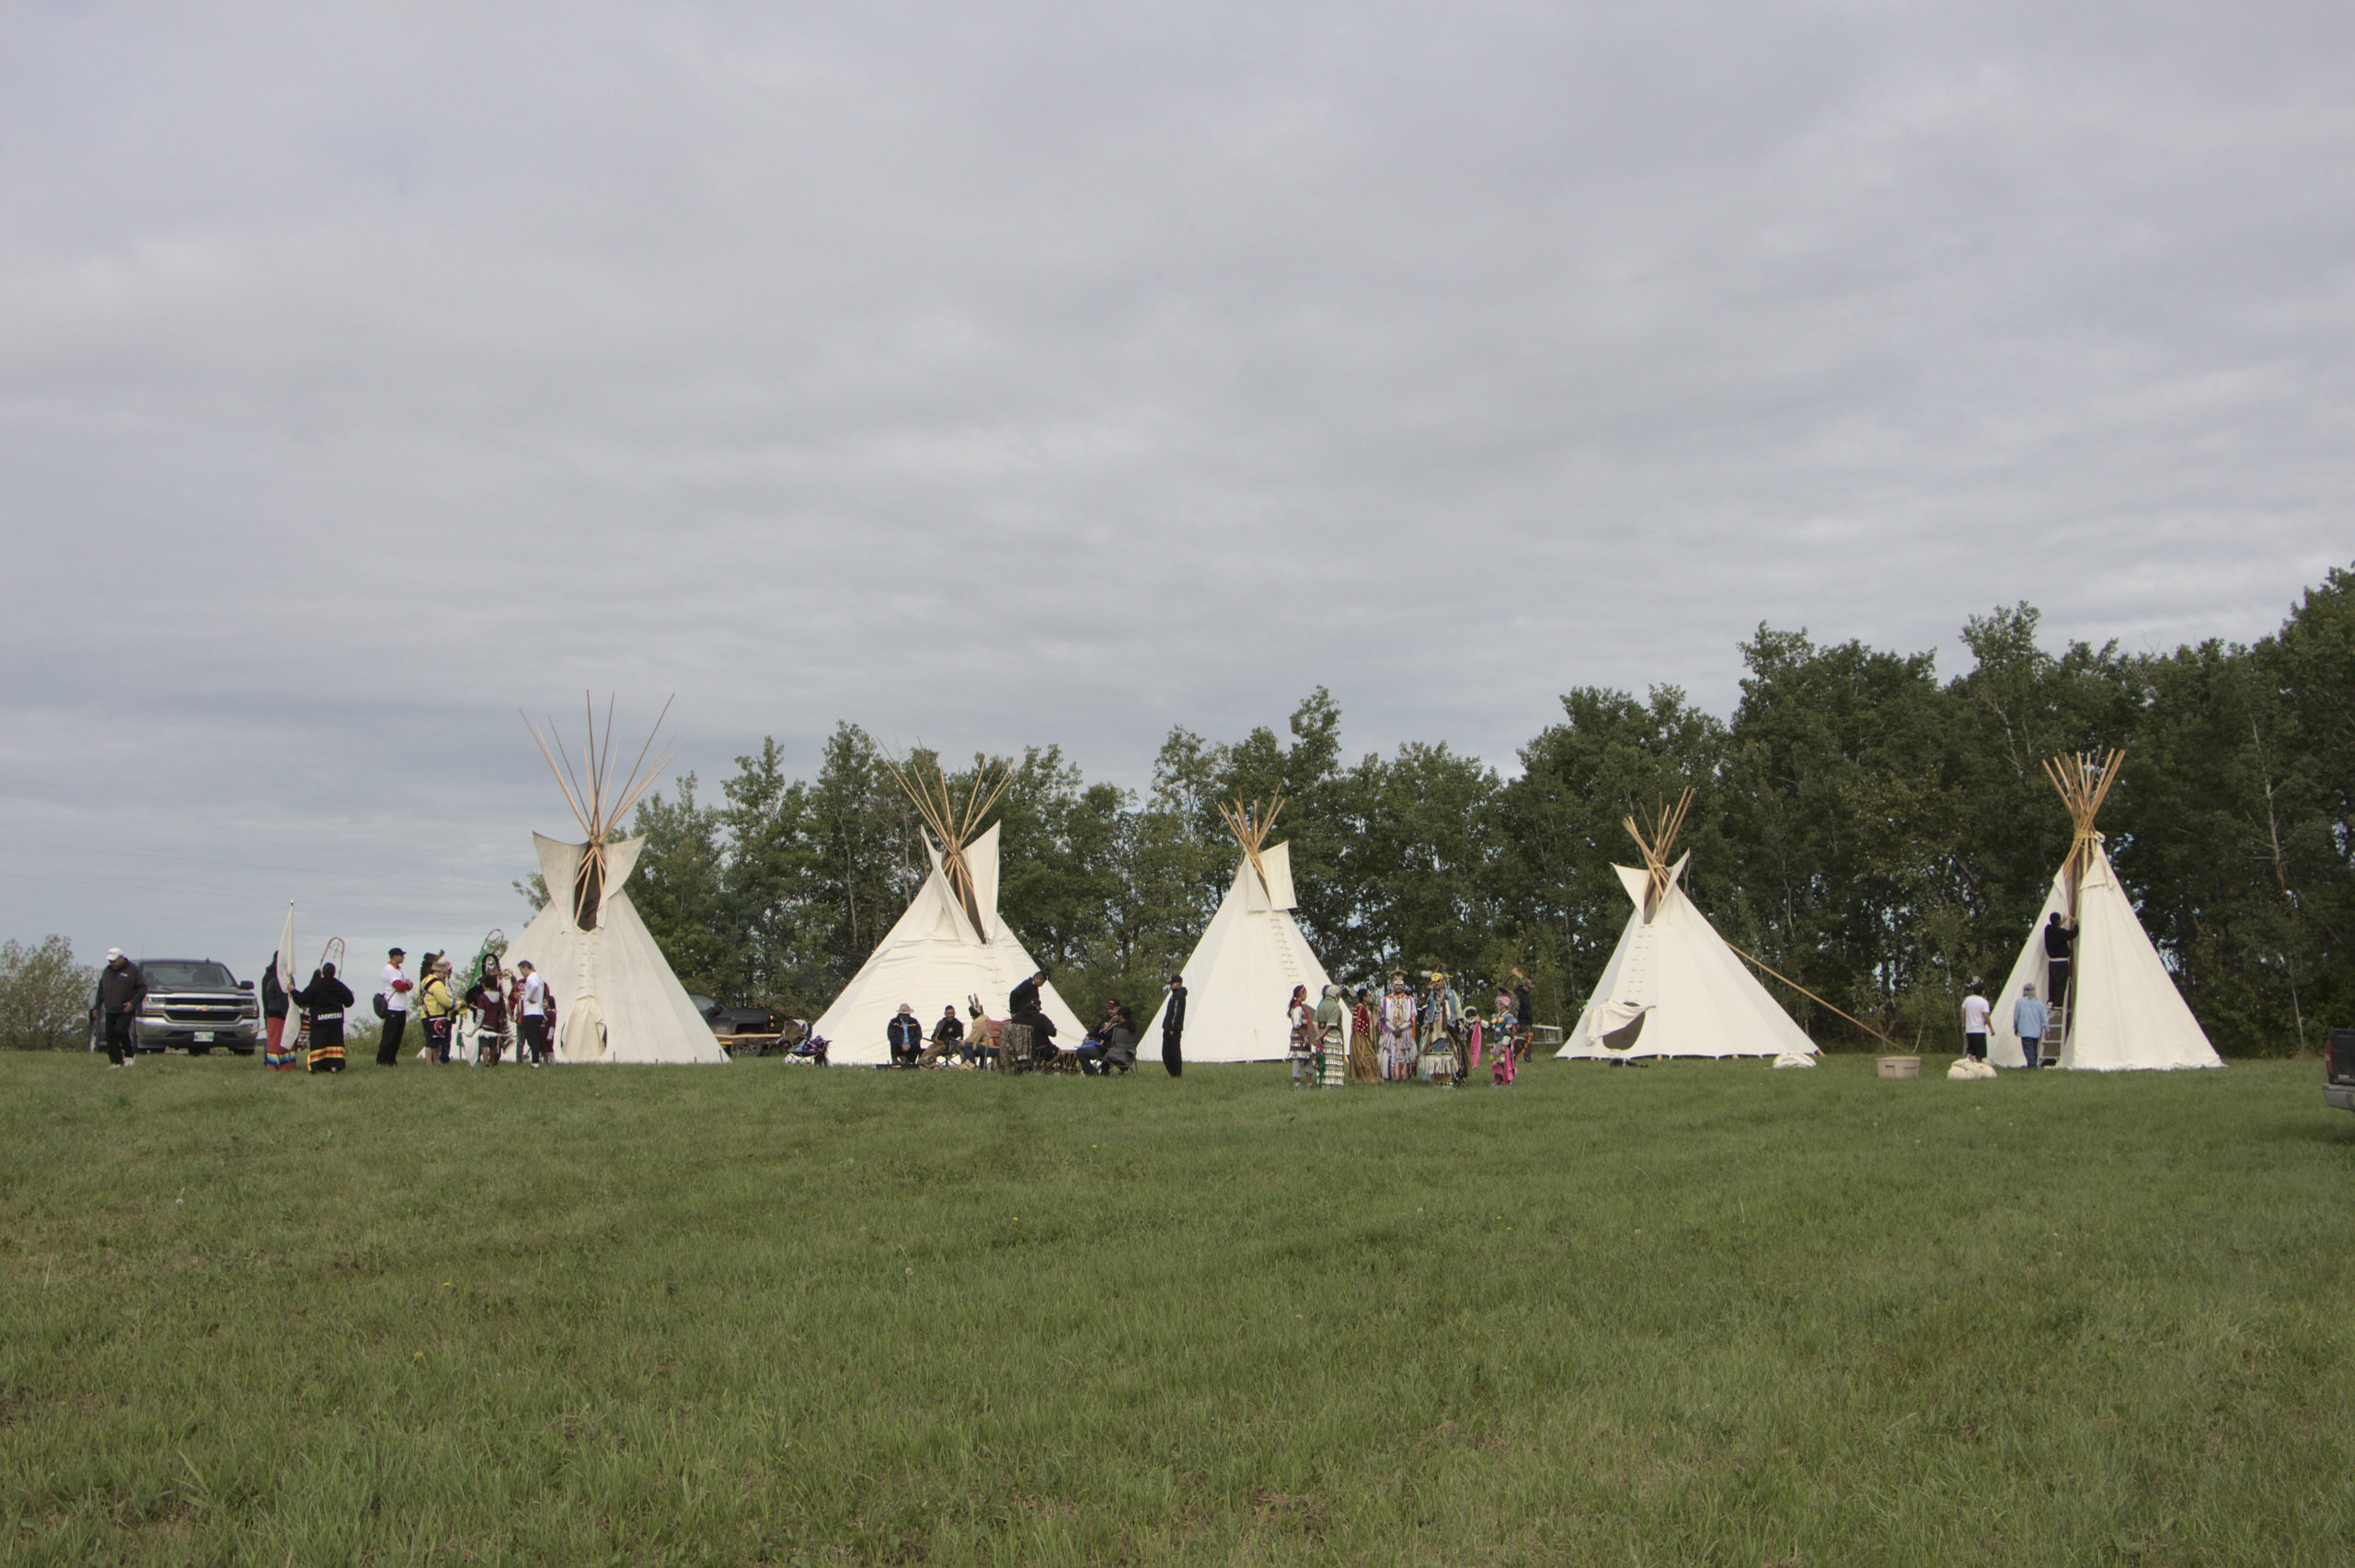 Five teepees set up and people dressed for ceremony